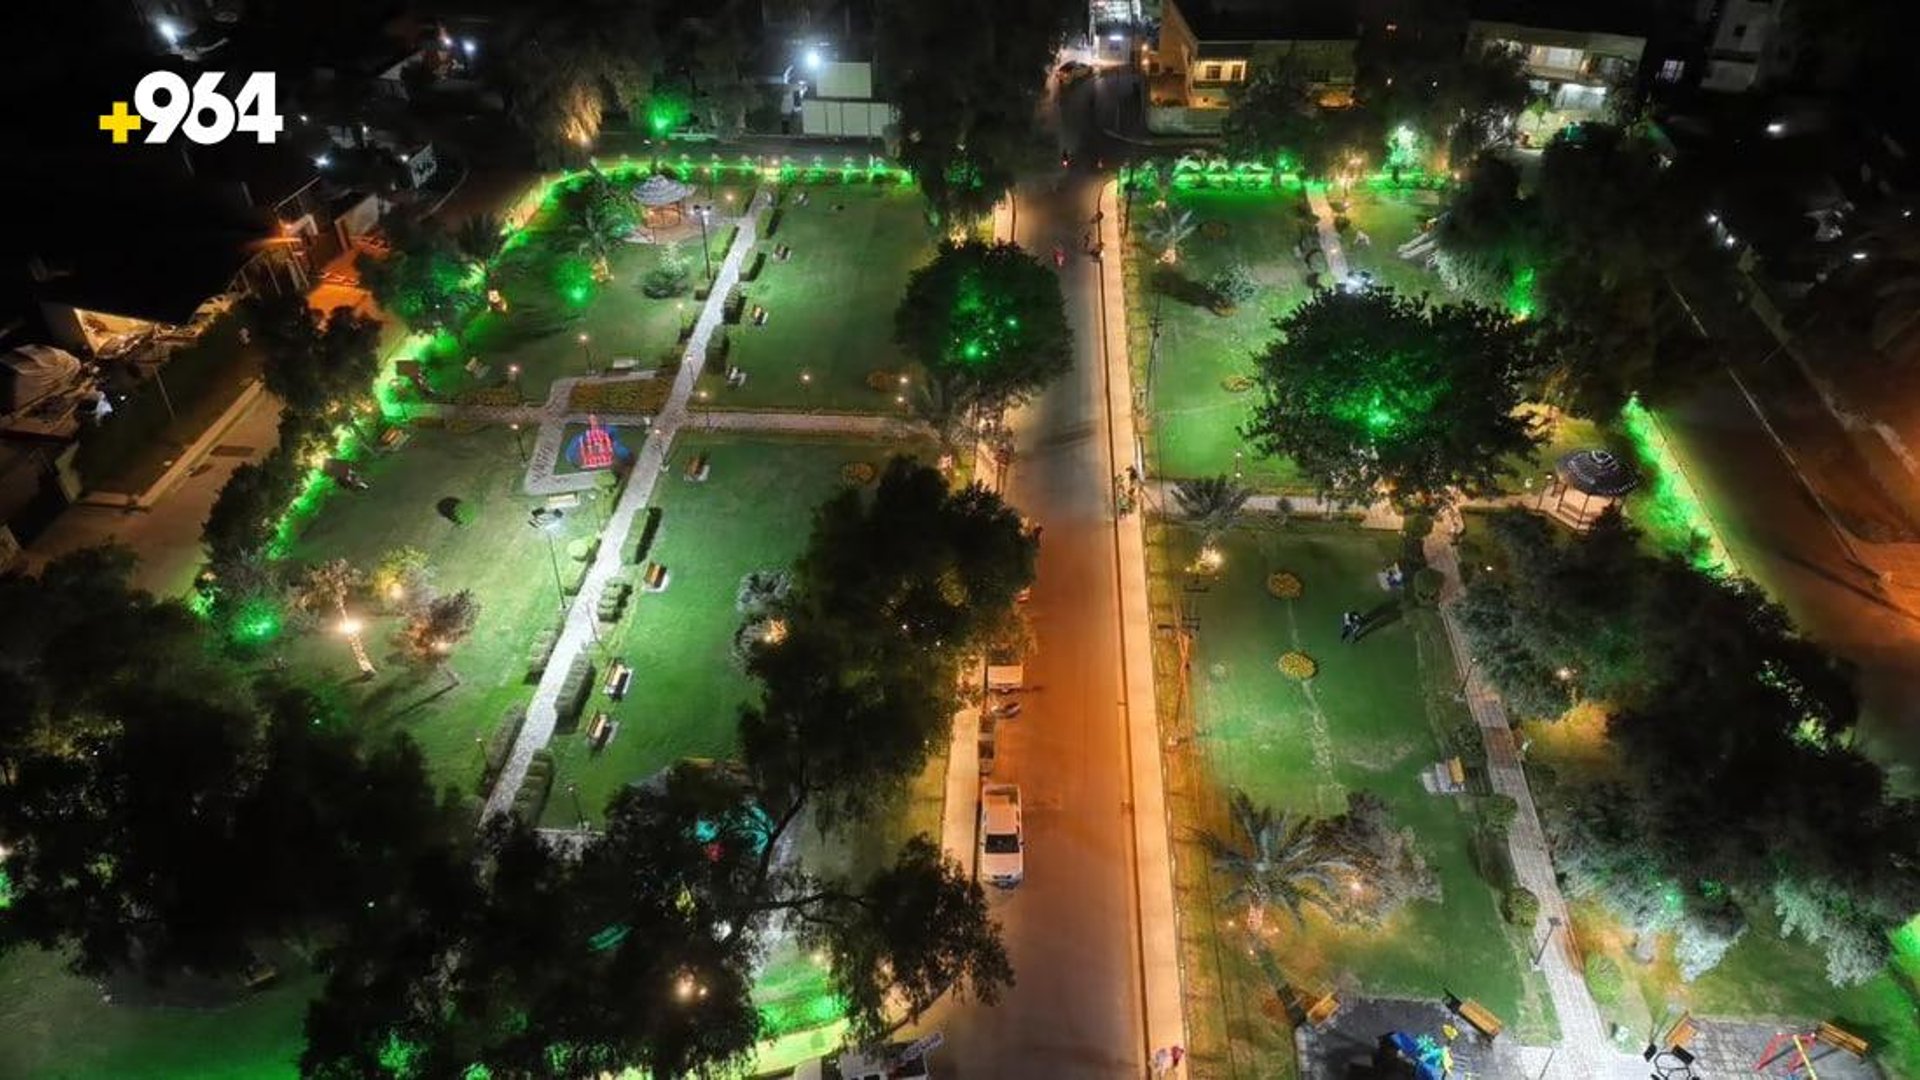 Baghdad municipality opens AlJadriya Park as part of green space expansion